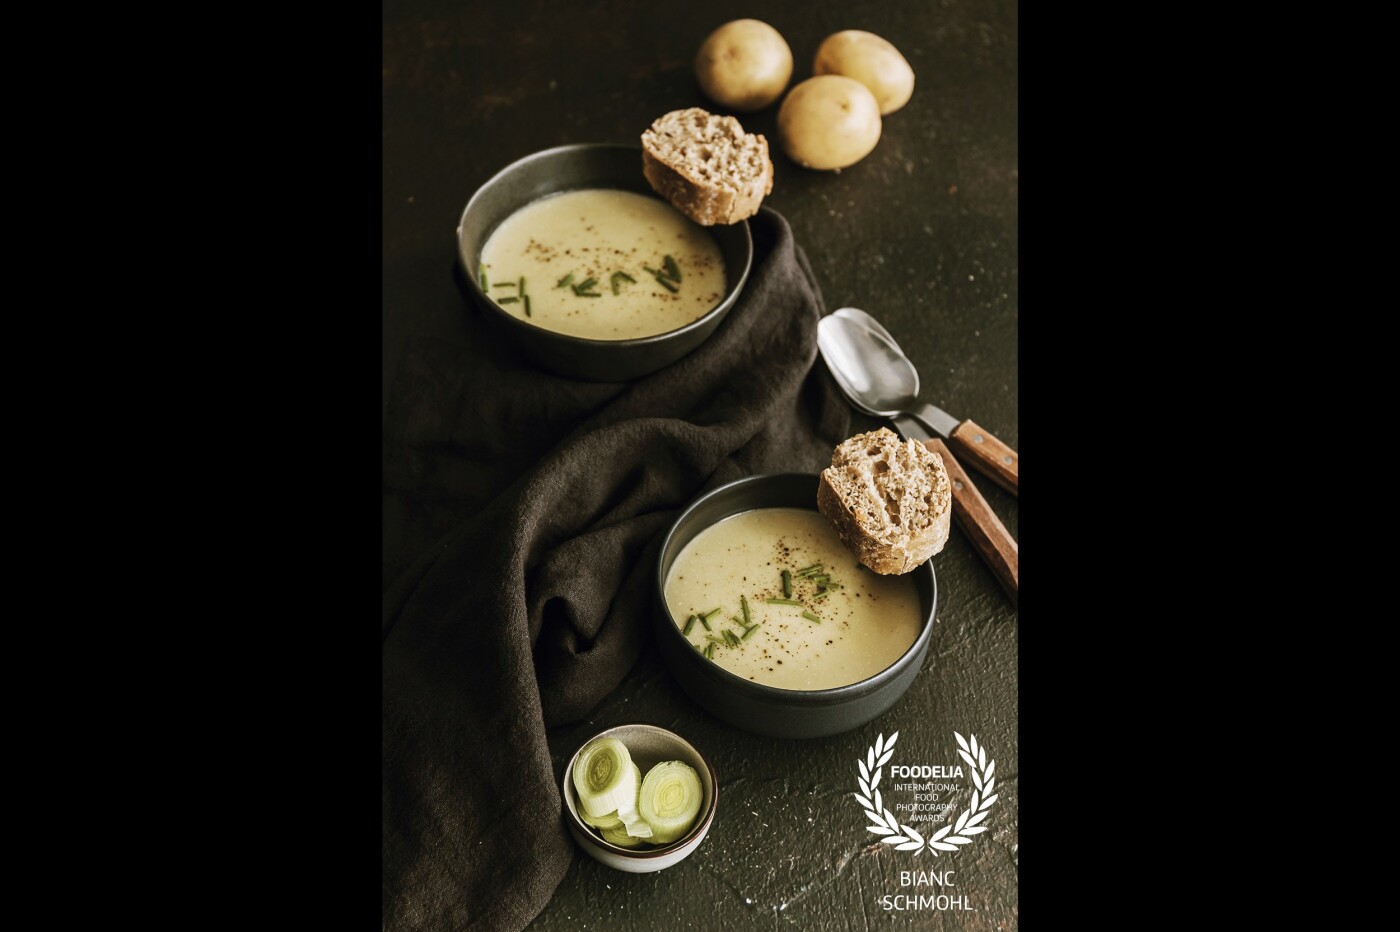 Potato soup with leek, onion, and chives. Great comfort food during the fall season and cold winters. I chose a semi-flatlay setup, which creates some nice spaces for decoration/styling. 